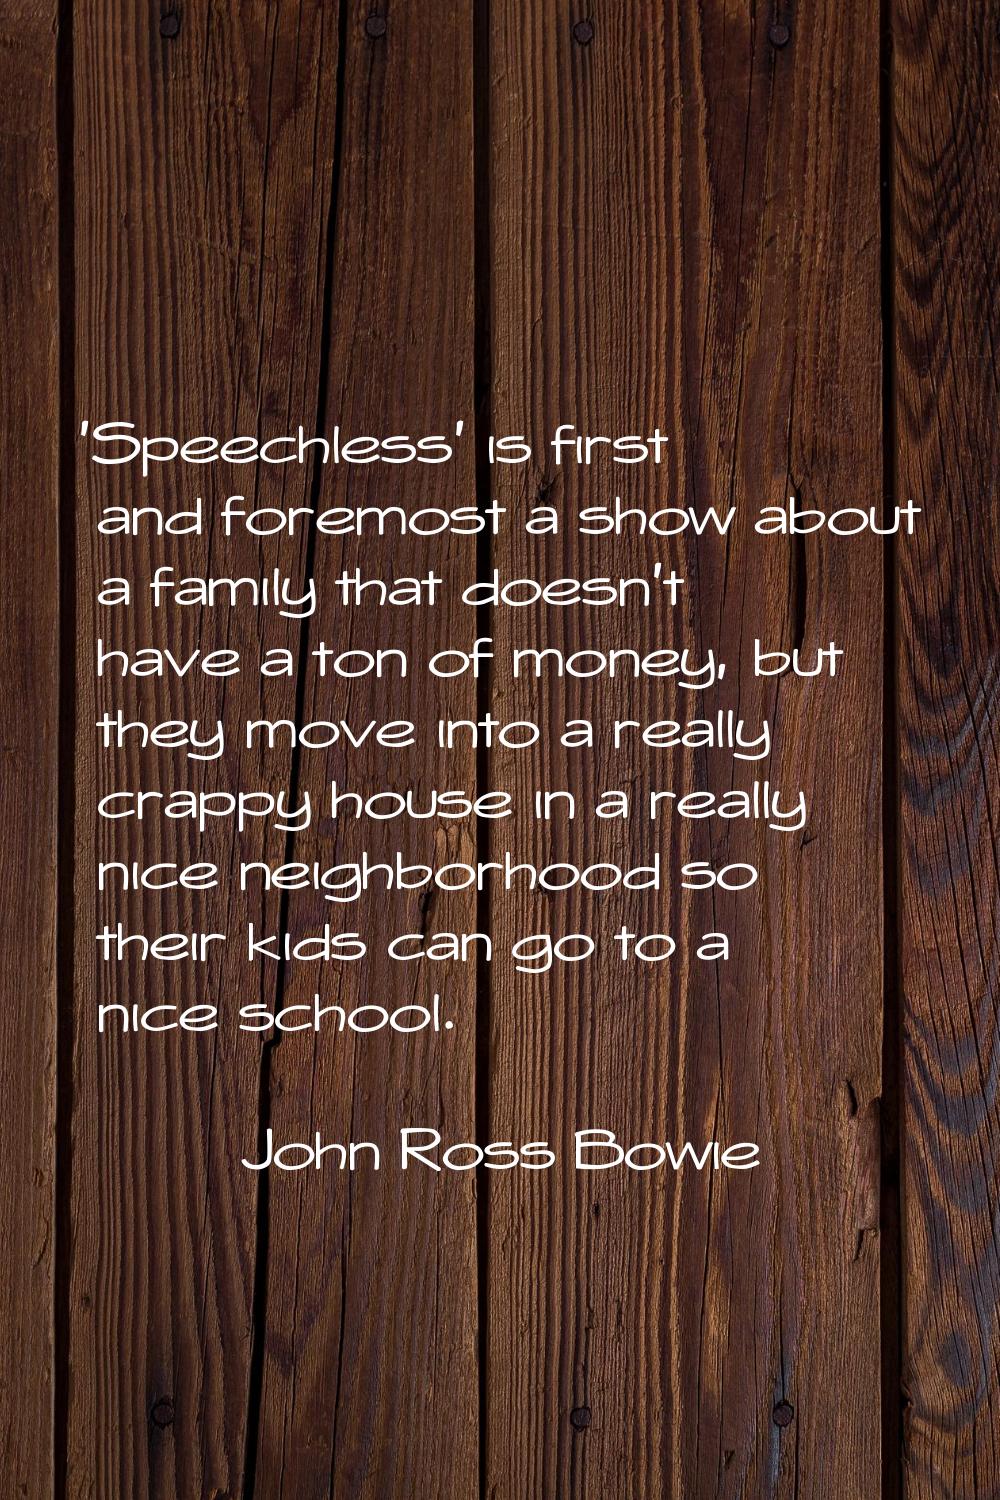 'Speechless' is first and foremost a show about a family that doesn't have a ton of money, but they